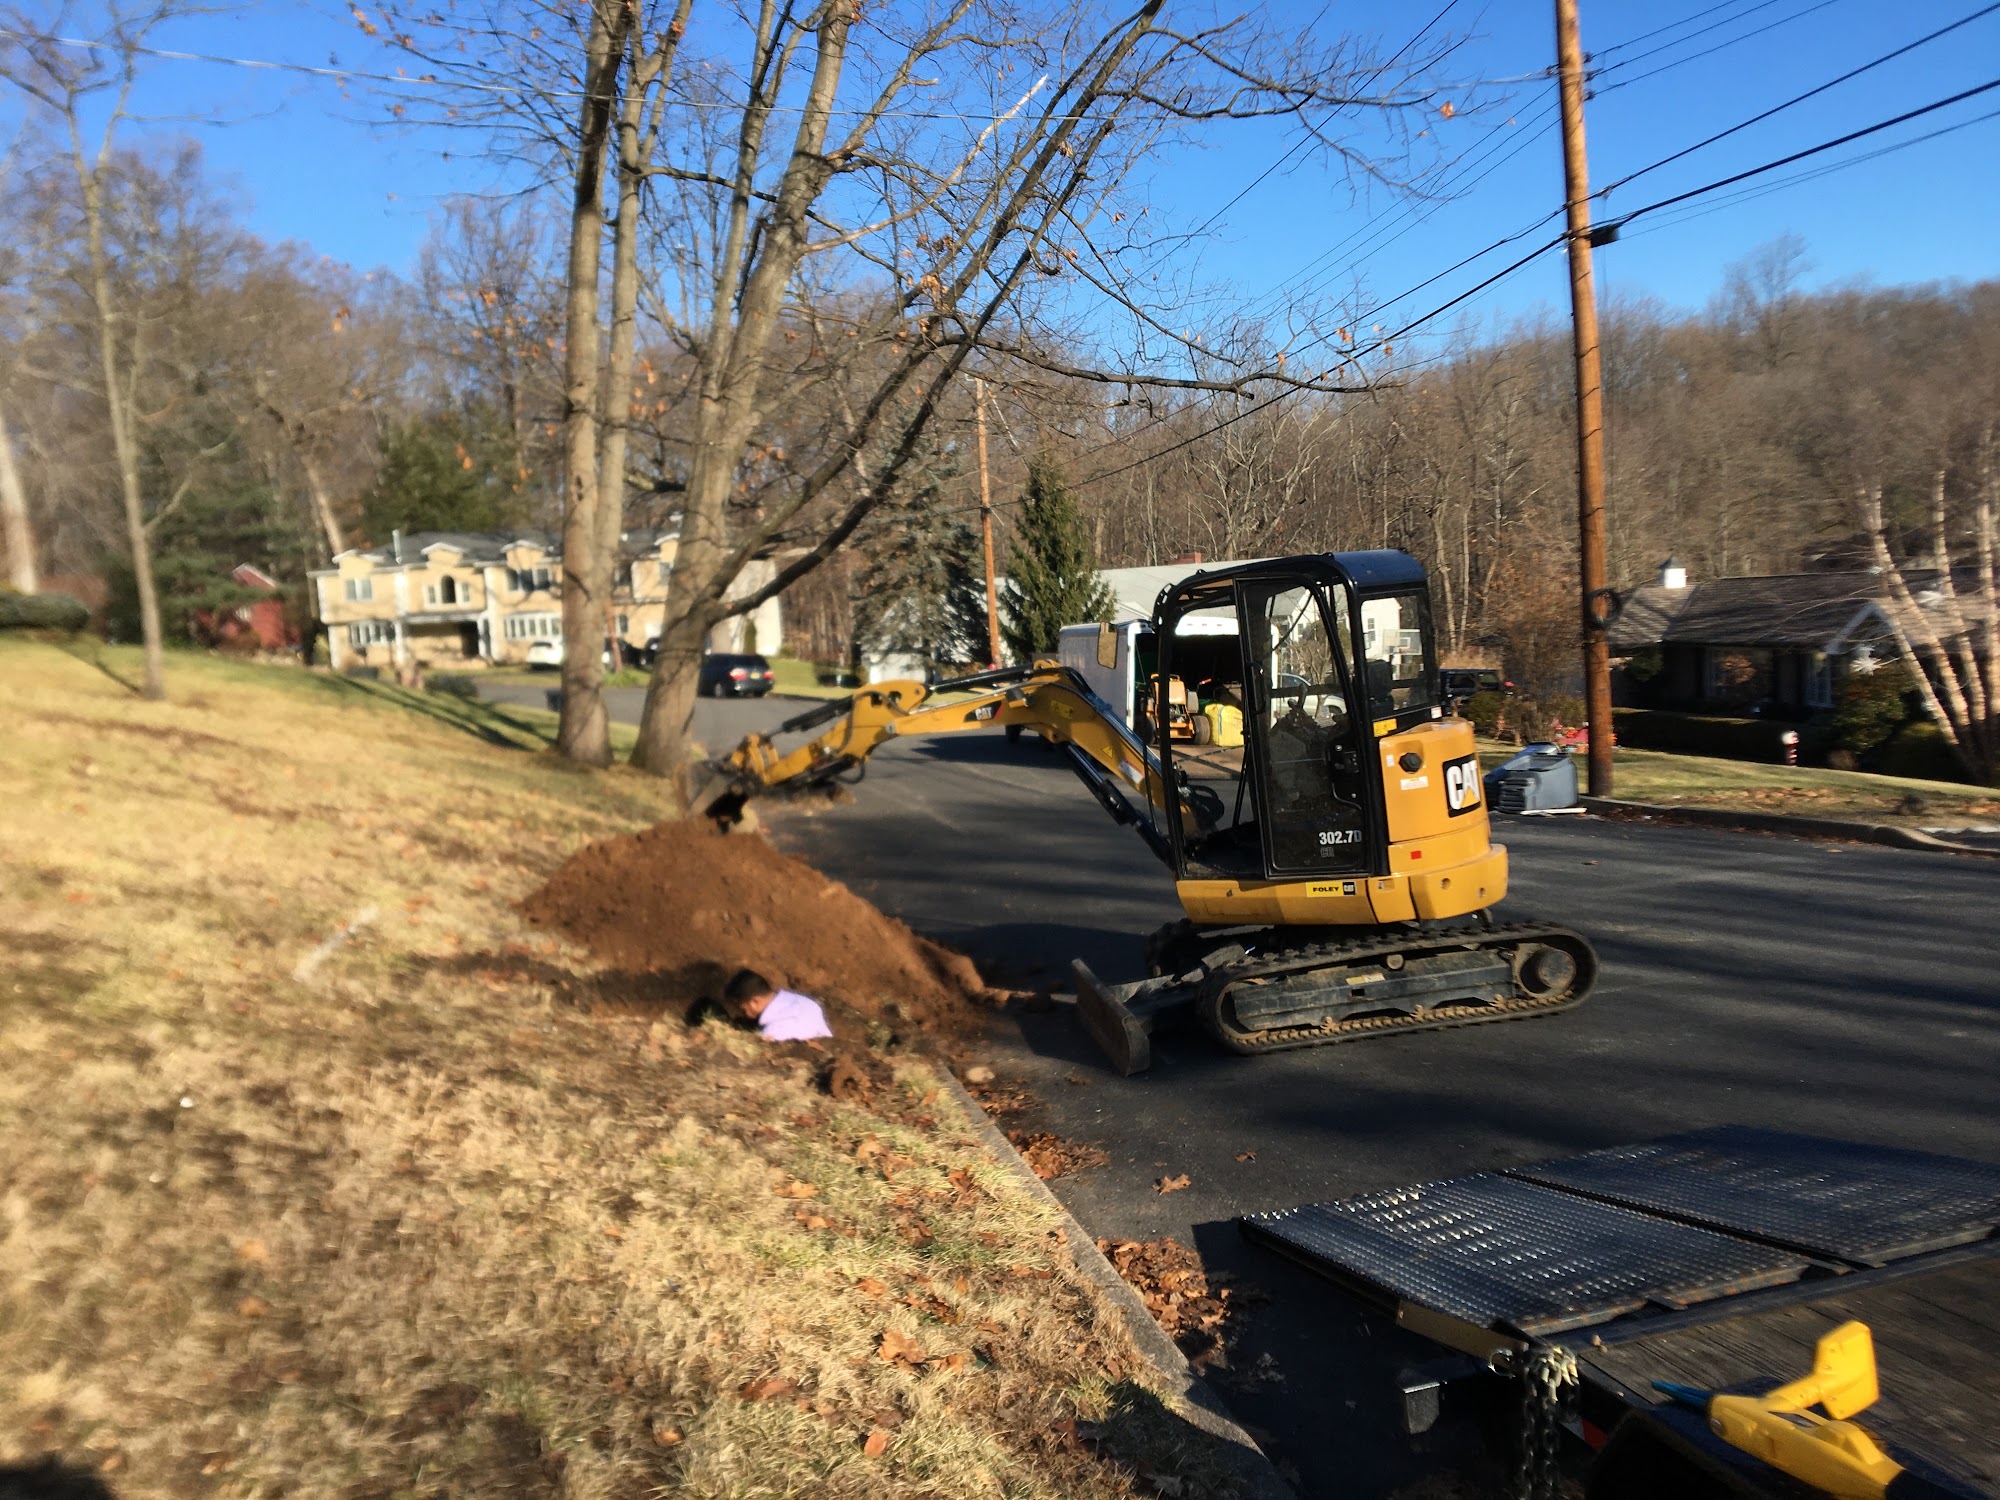 Ray Rooter Trenchless Sewer Line Replacement and Repair 312 Wyckoff Ave, Waldwick New Jersey 07463